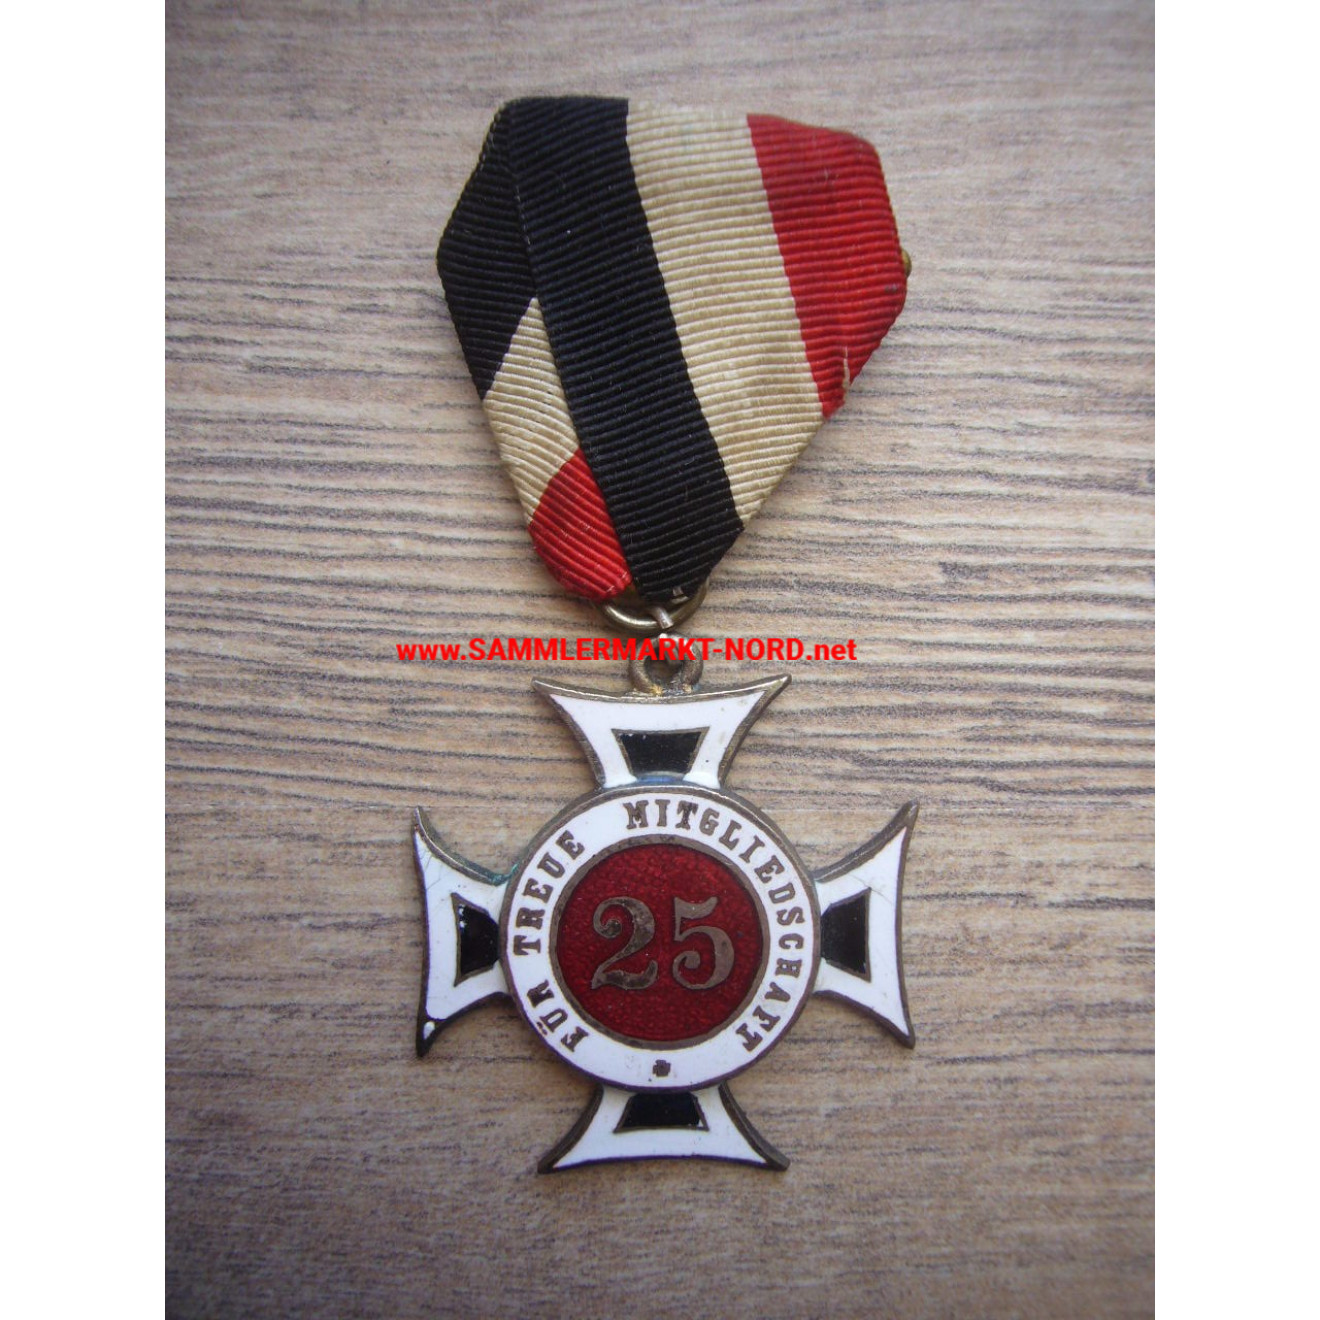 Soldier association - Badge of honor for 25 years of loyal membership